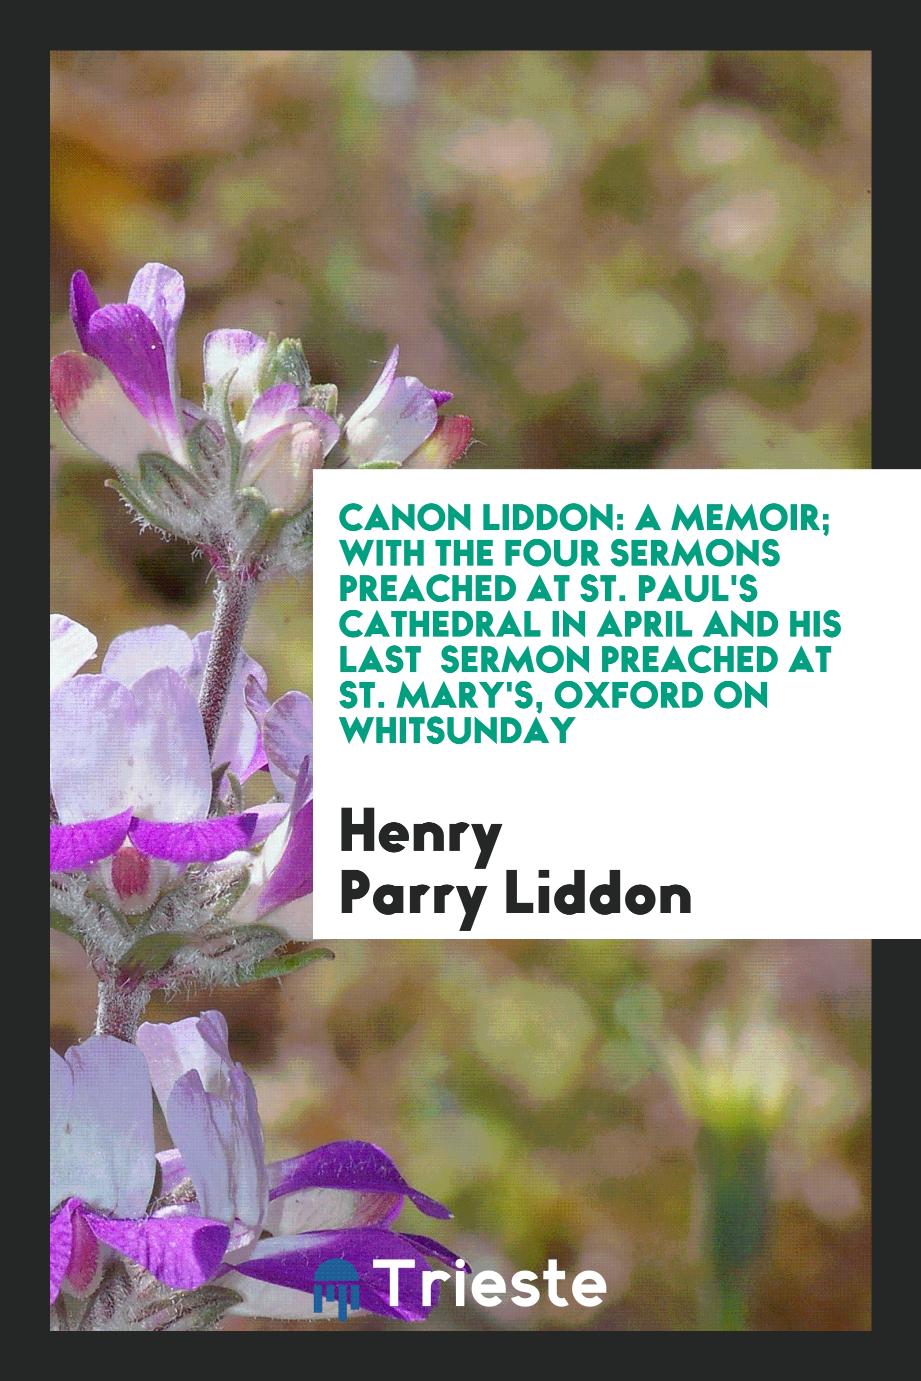 Canon Liddon: a memoir; with the four sermons preached at St. Paul's Cathedral in April and his last sermon preached at St. Mary's, Oxford on Whitsunday